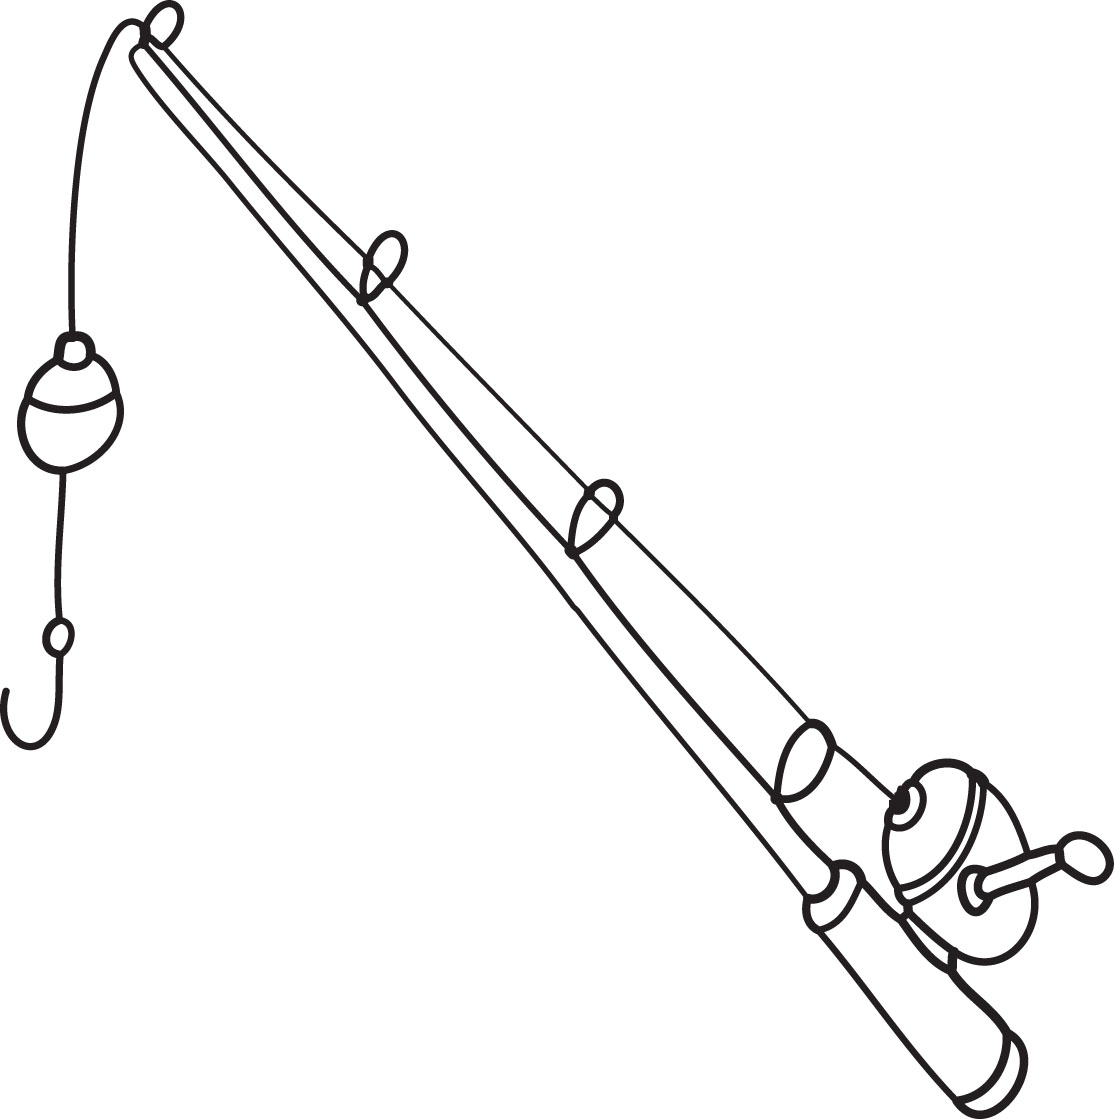 Fishing rod clipart black and white